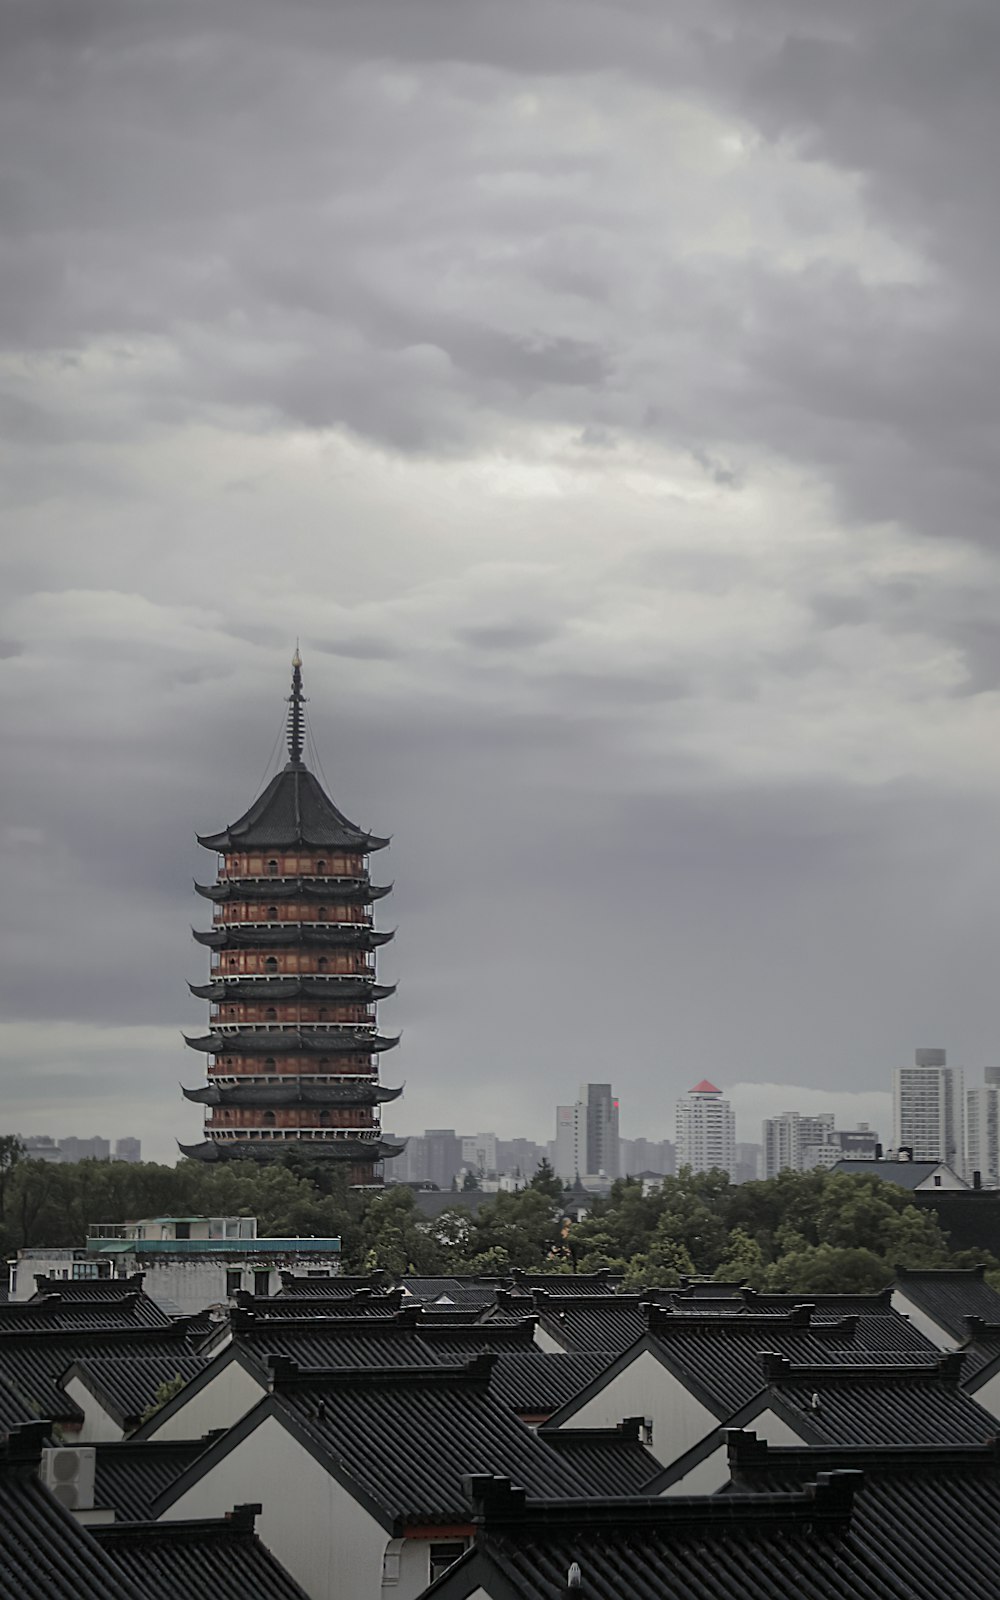 a tall tower towering over a city under a cloudy sky